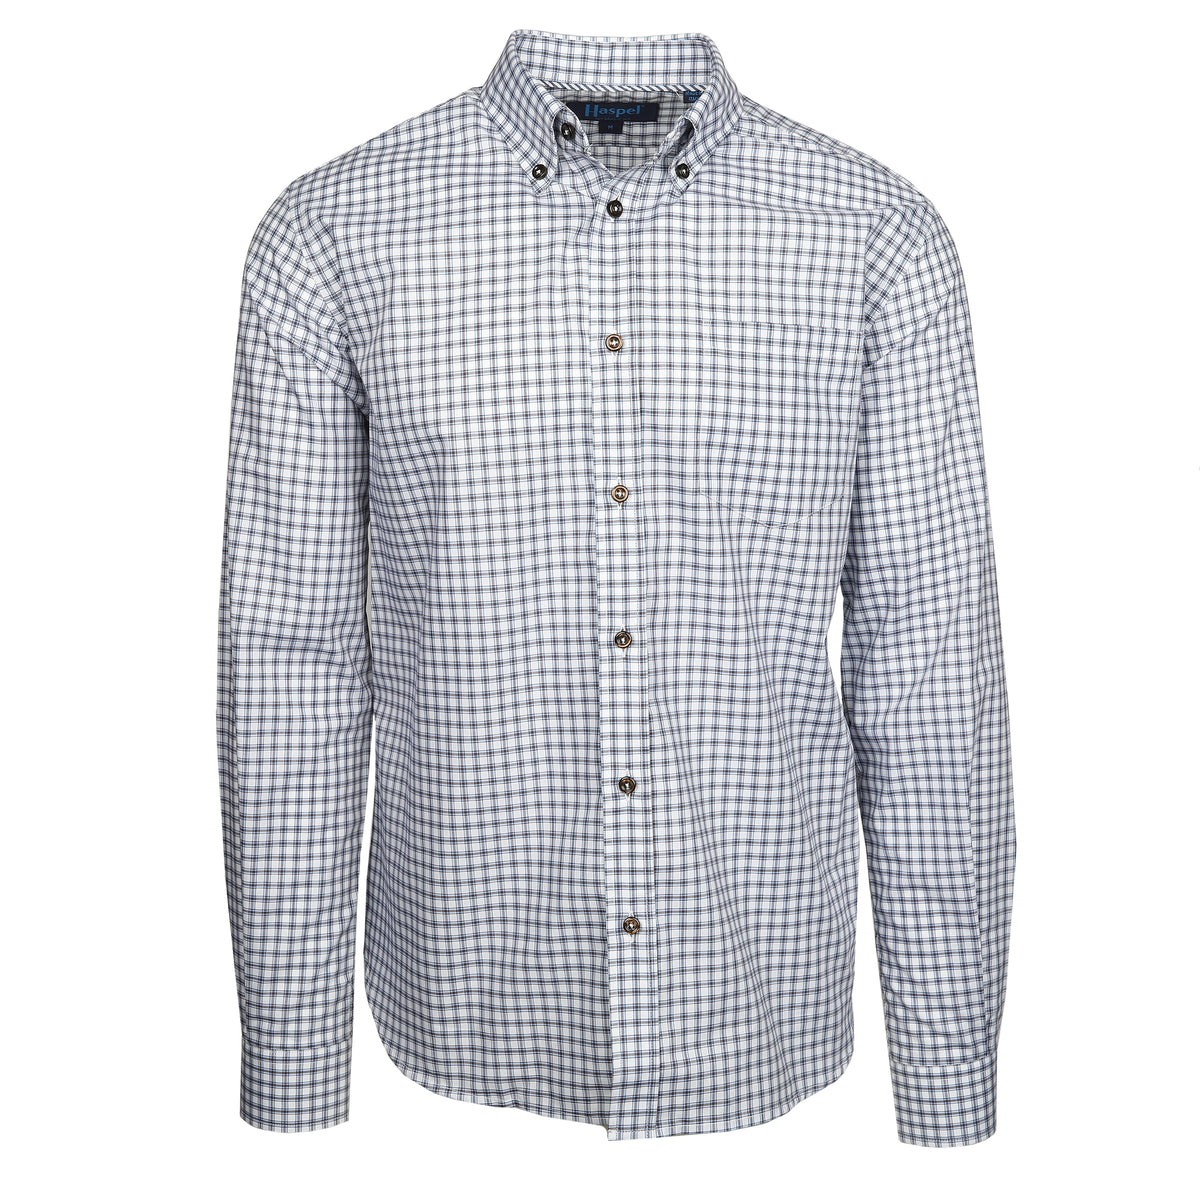 Enjoy the luxury of 100% cotton, Italian made quality, and eye-catching blue and brown graph check.  100% Cotton • Button Down Collar • Long Sleeve • Contrast Buttons • Chest Pocket • Machine Washable • Made in Italy